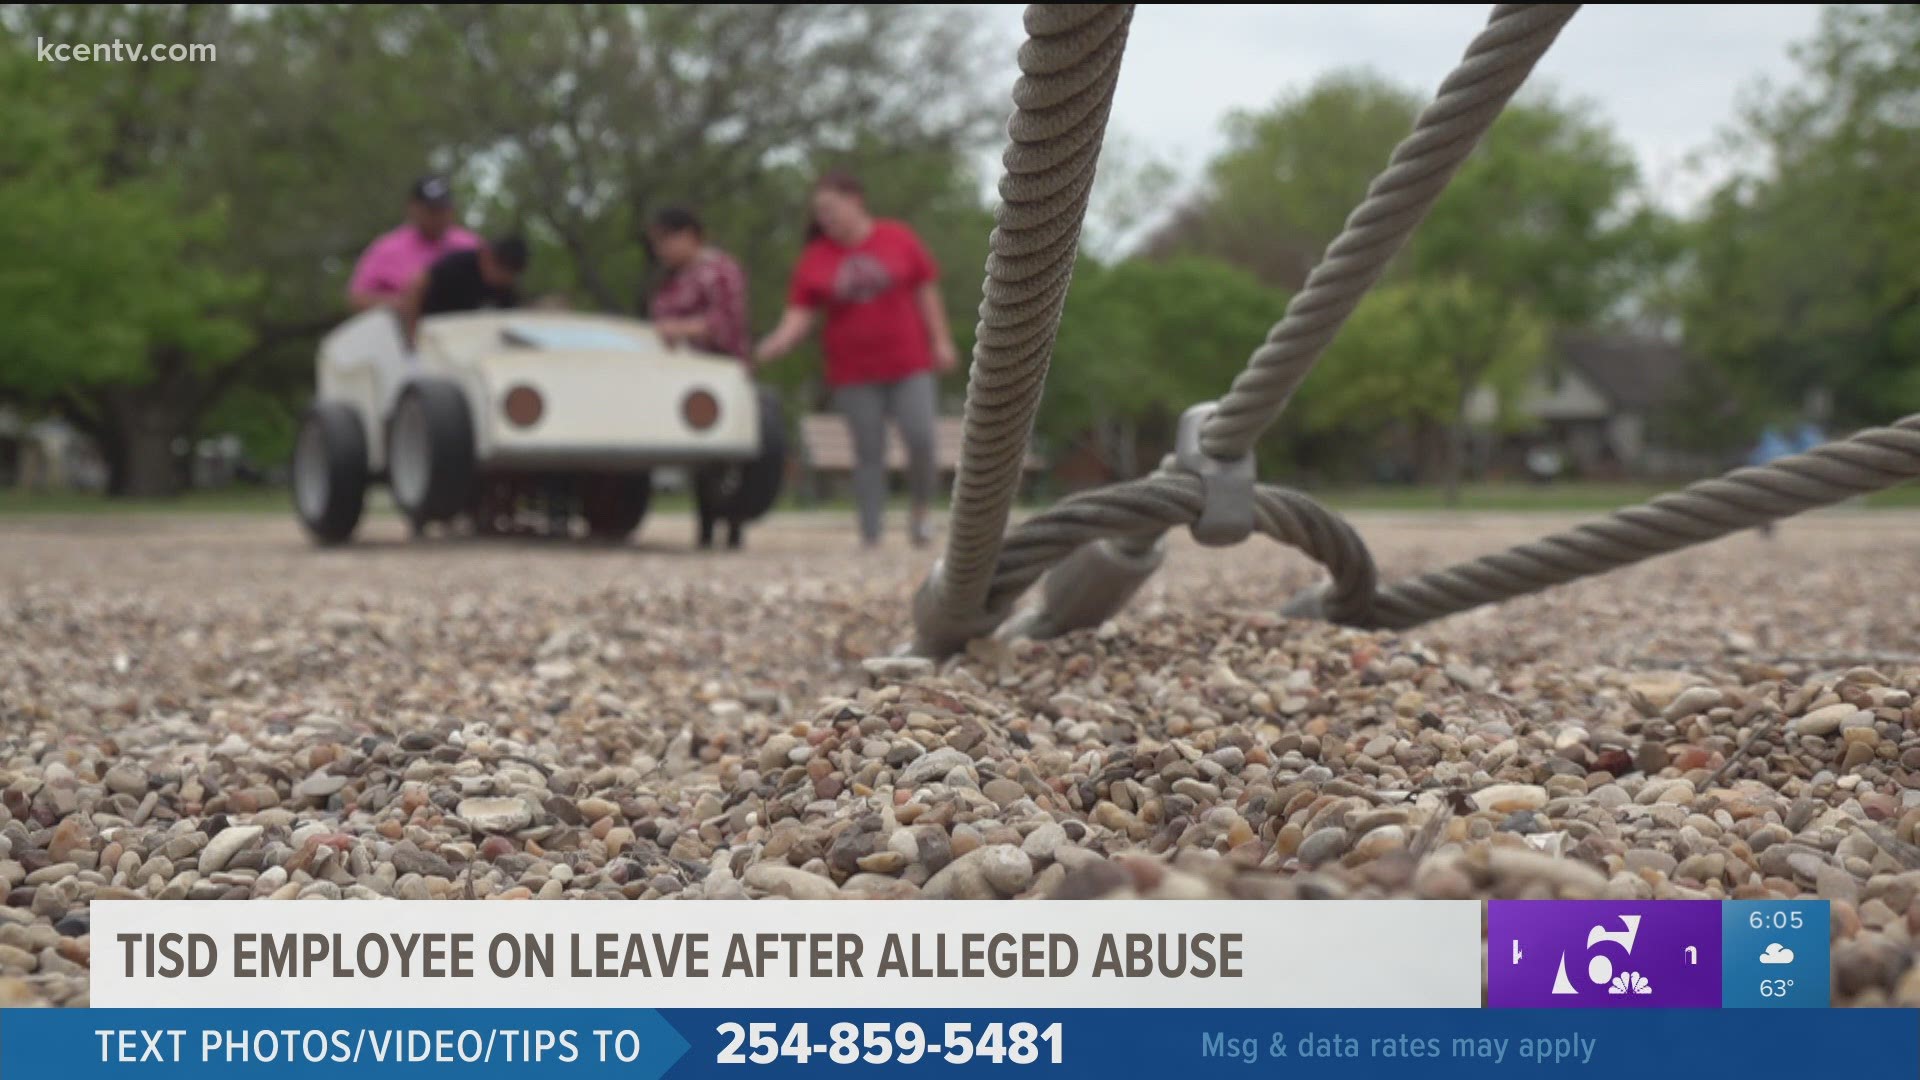 Temple ISD offered a brief statement after allegations of physical abuse were brought forward by a concerned parent.